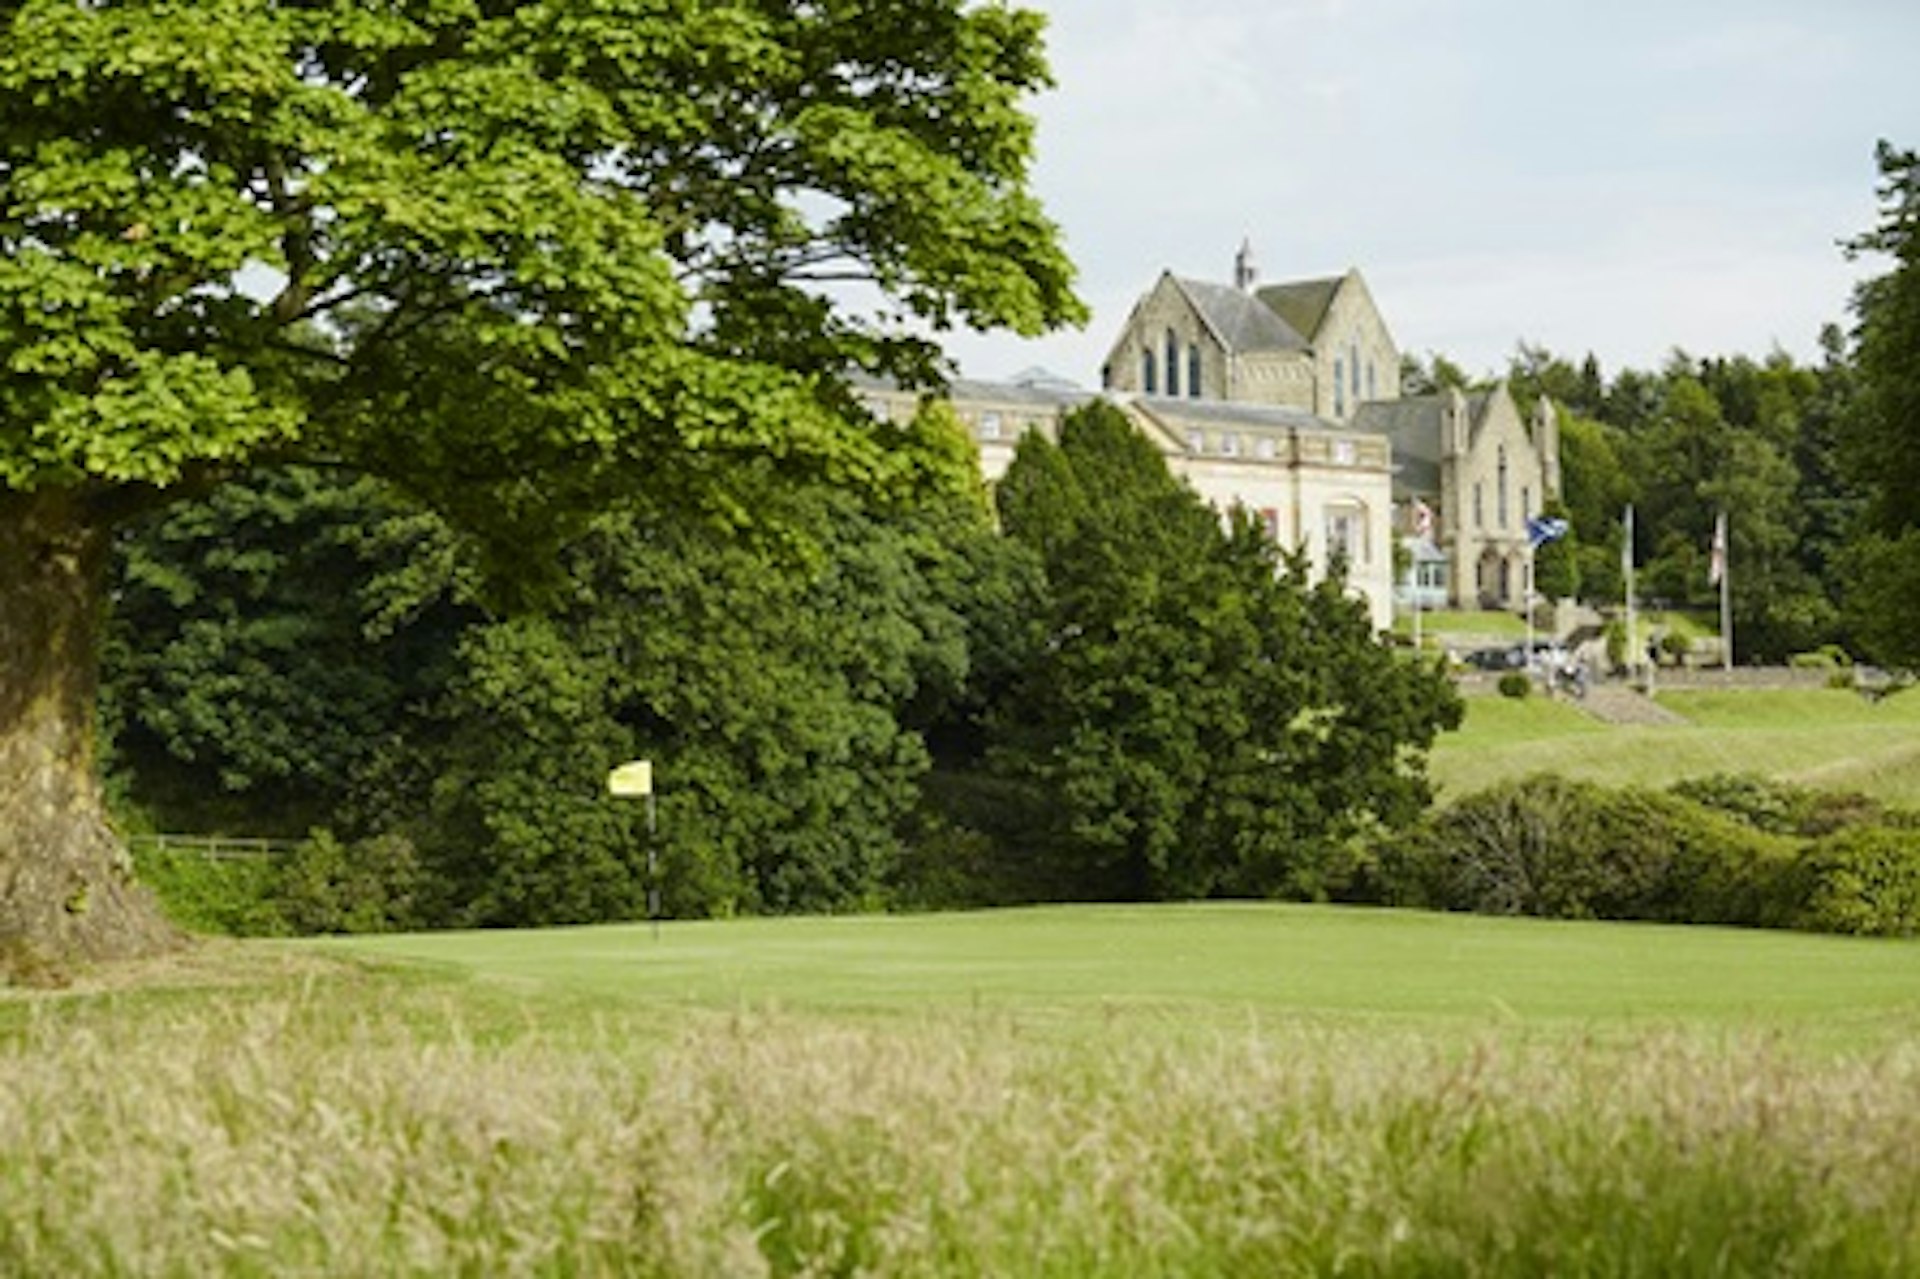 18 Hole Round of Golf for Two at The Shrigley Hall Hotel & Spa 1